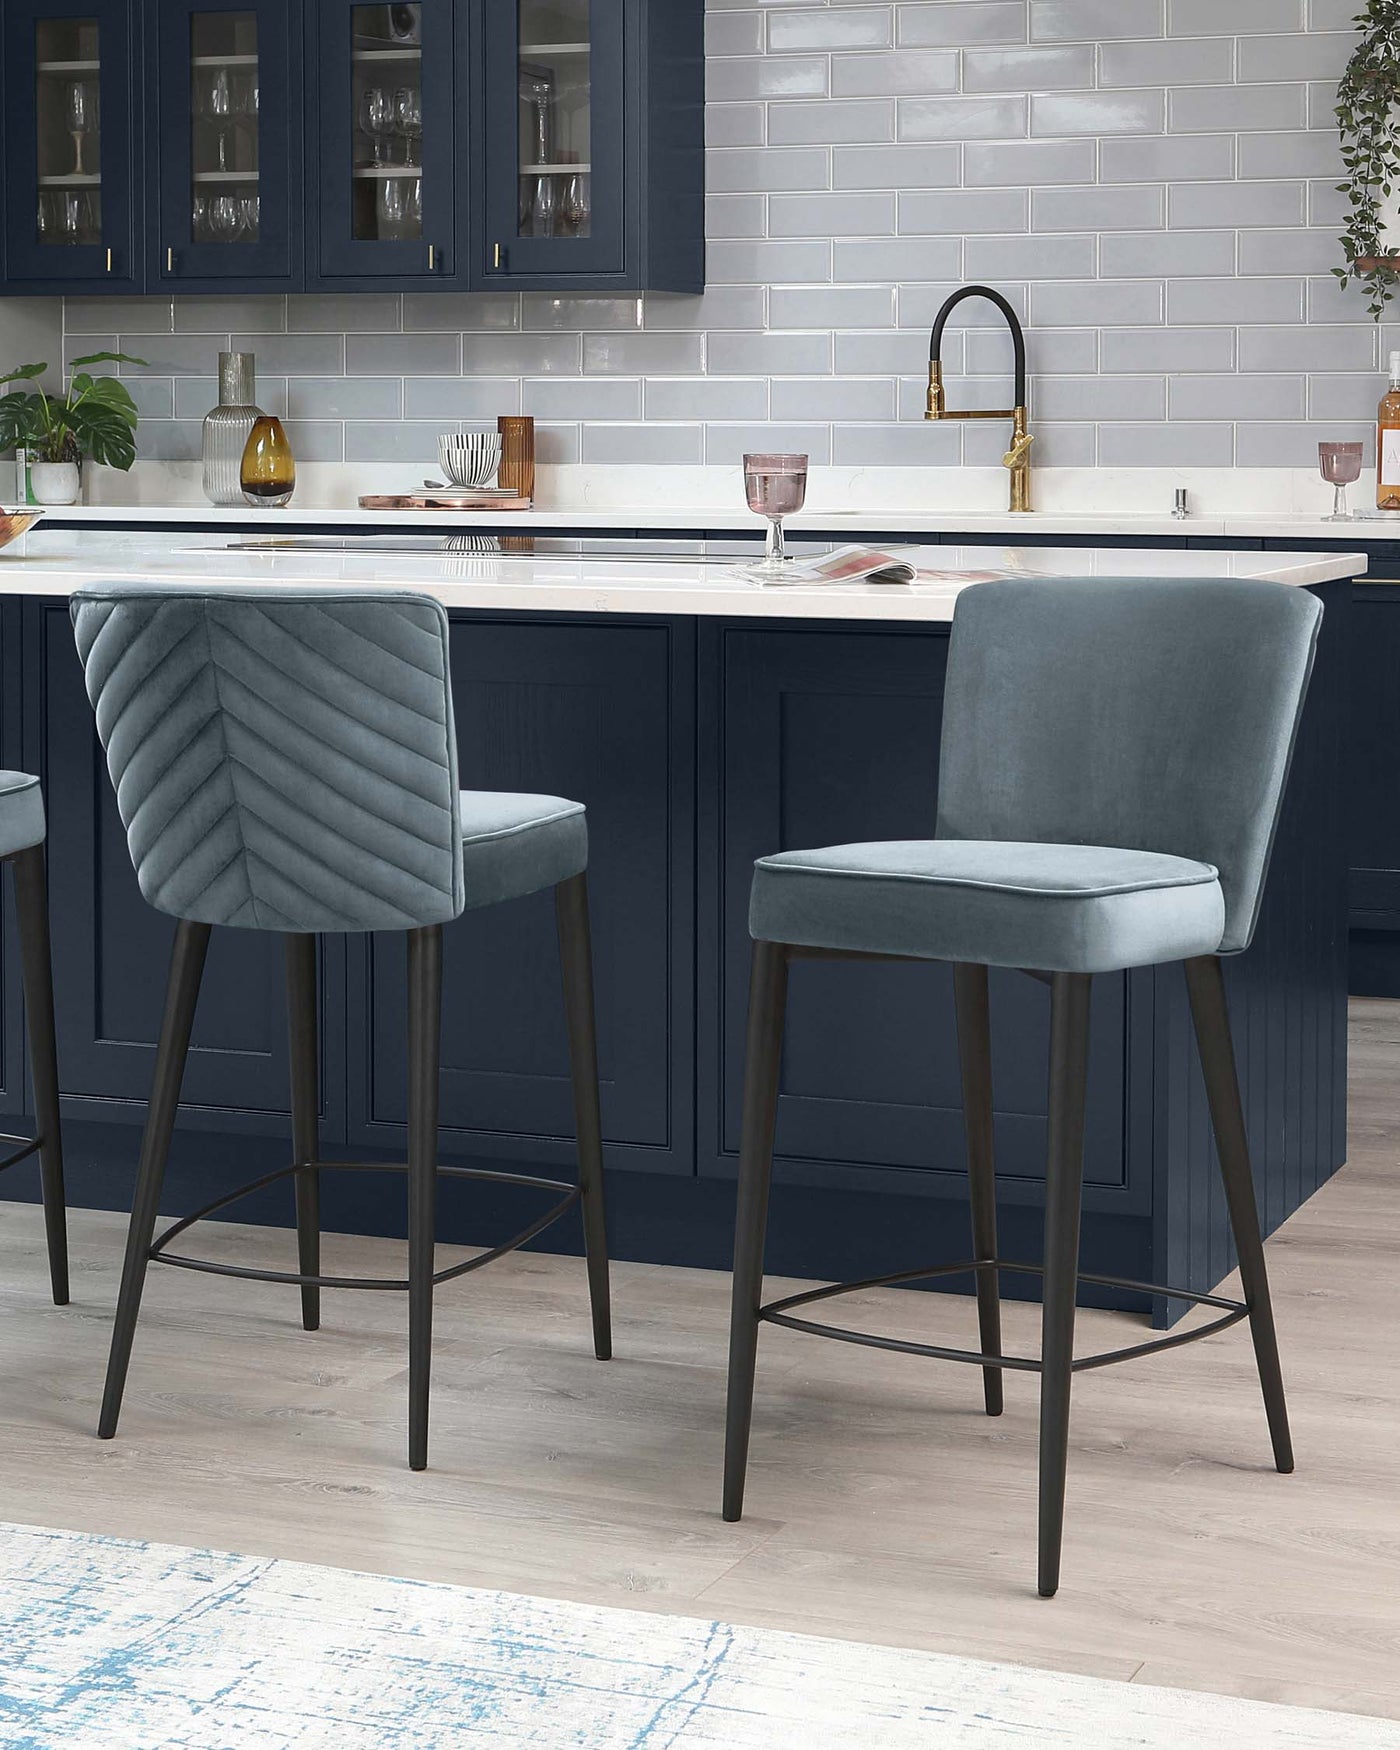 Elegant modern bar stools with sleek metal frames and luxurious quilted velvet upholstery in a soft grey tone, set against a kitchen island with a deep blue finish.